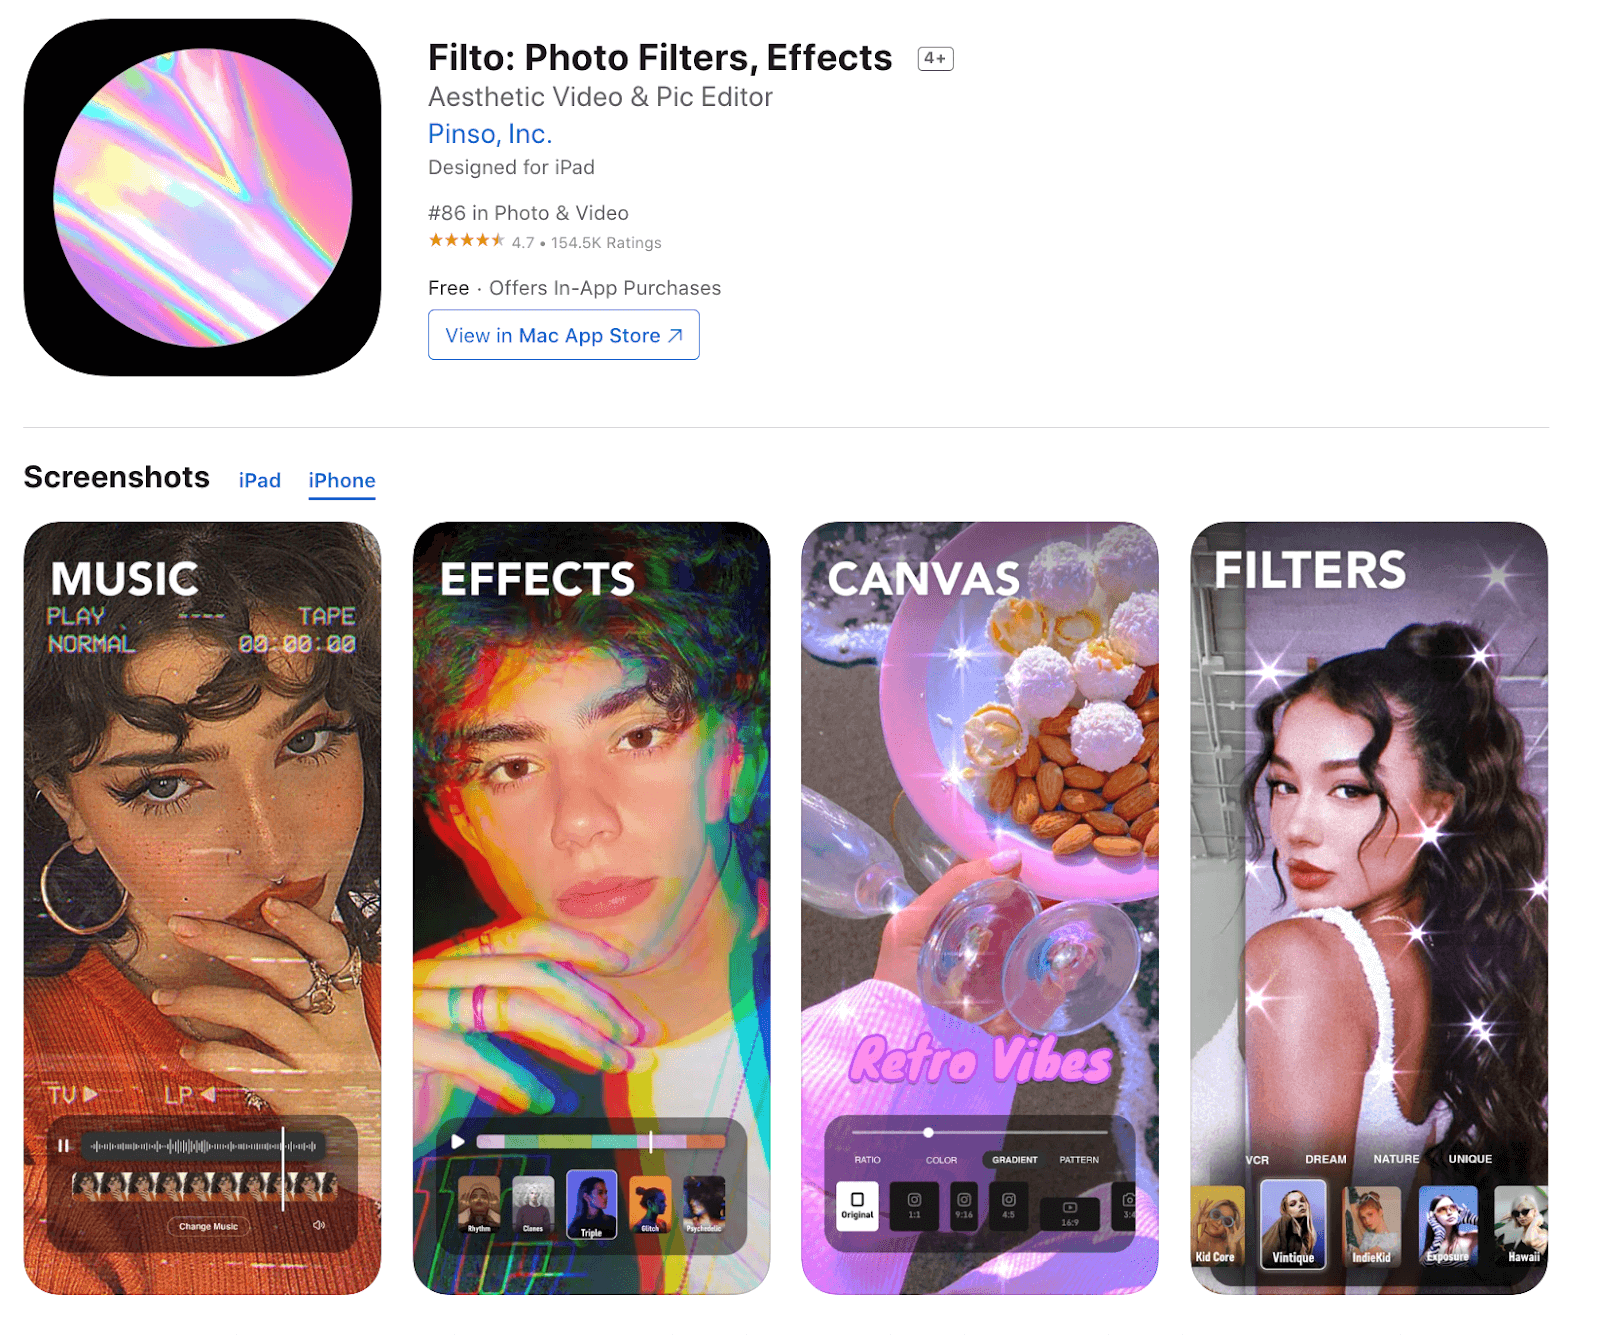 Video Filters | Top 10 Video Filter Apps for iPhone and Android